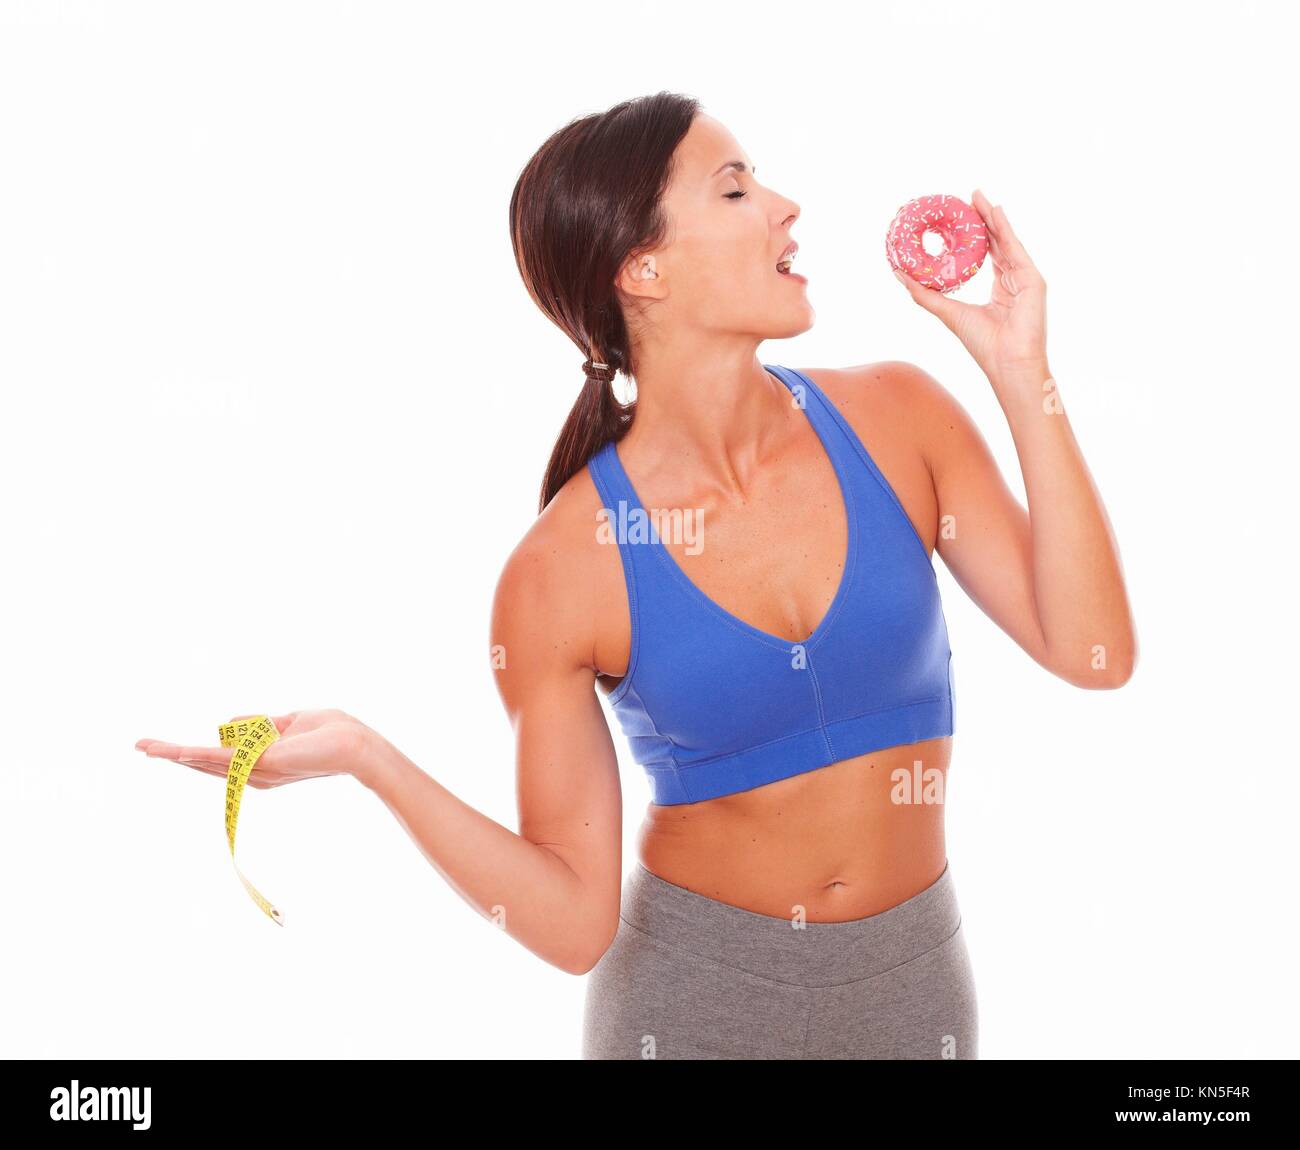 Fit woman in sport clothing holding measuring tape while biting a cake against white background. Stock Photo